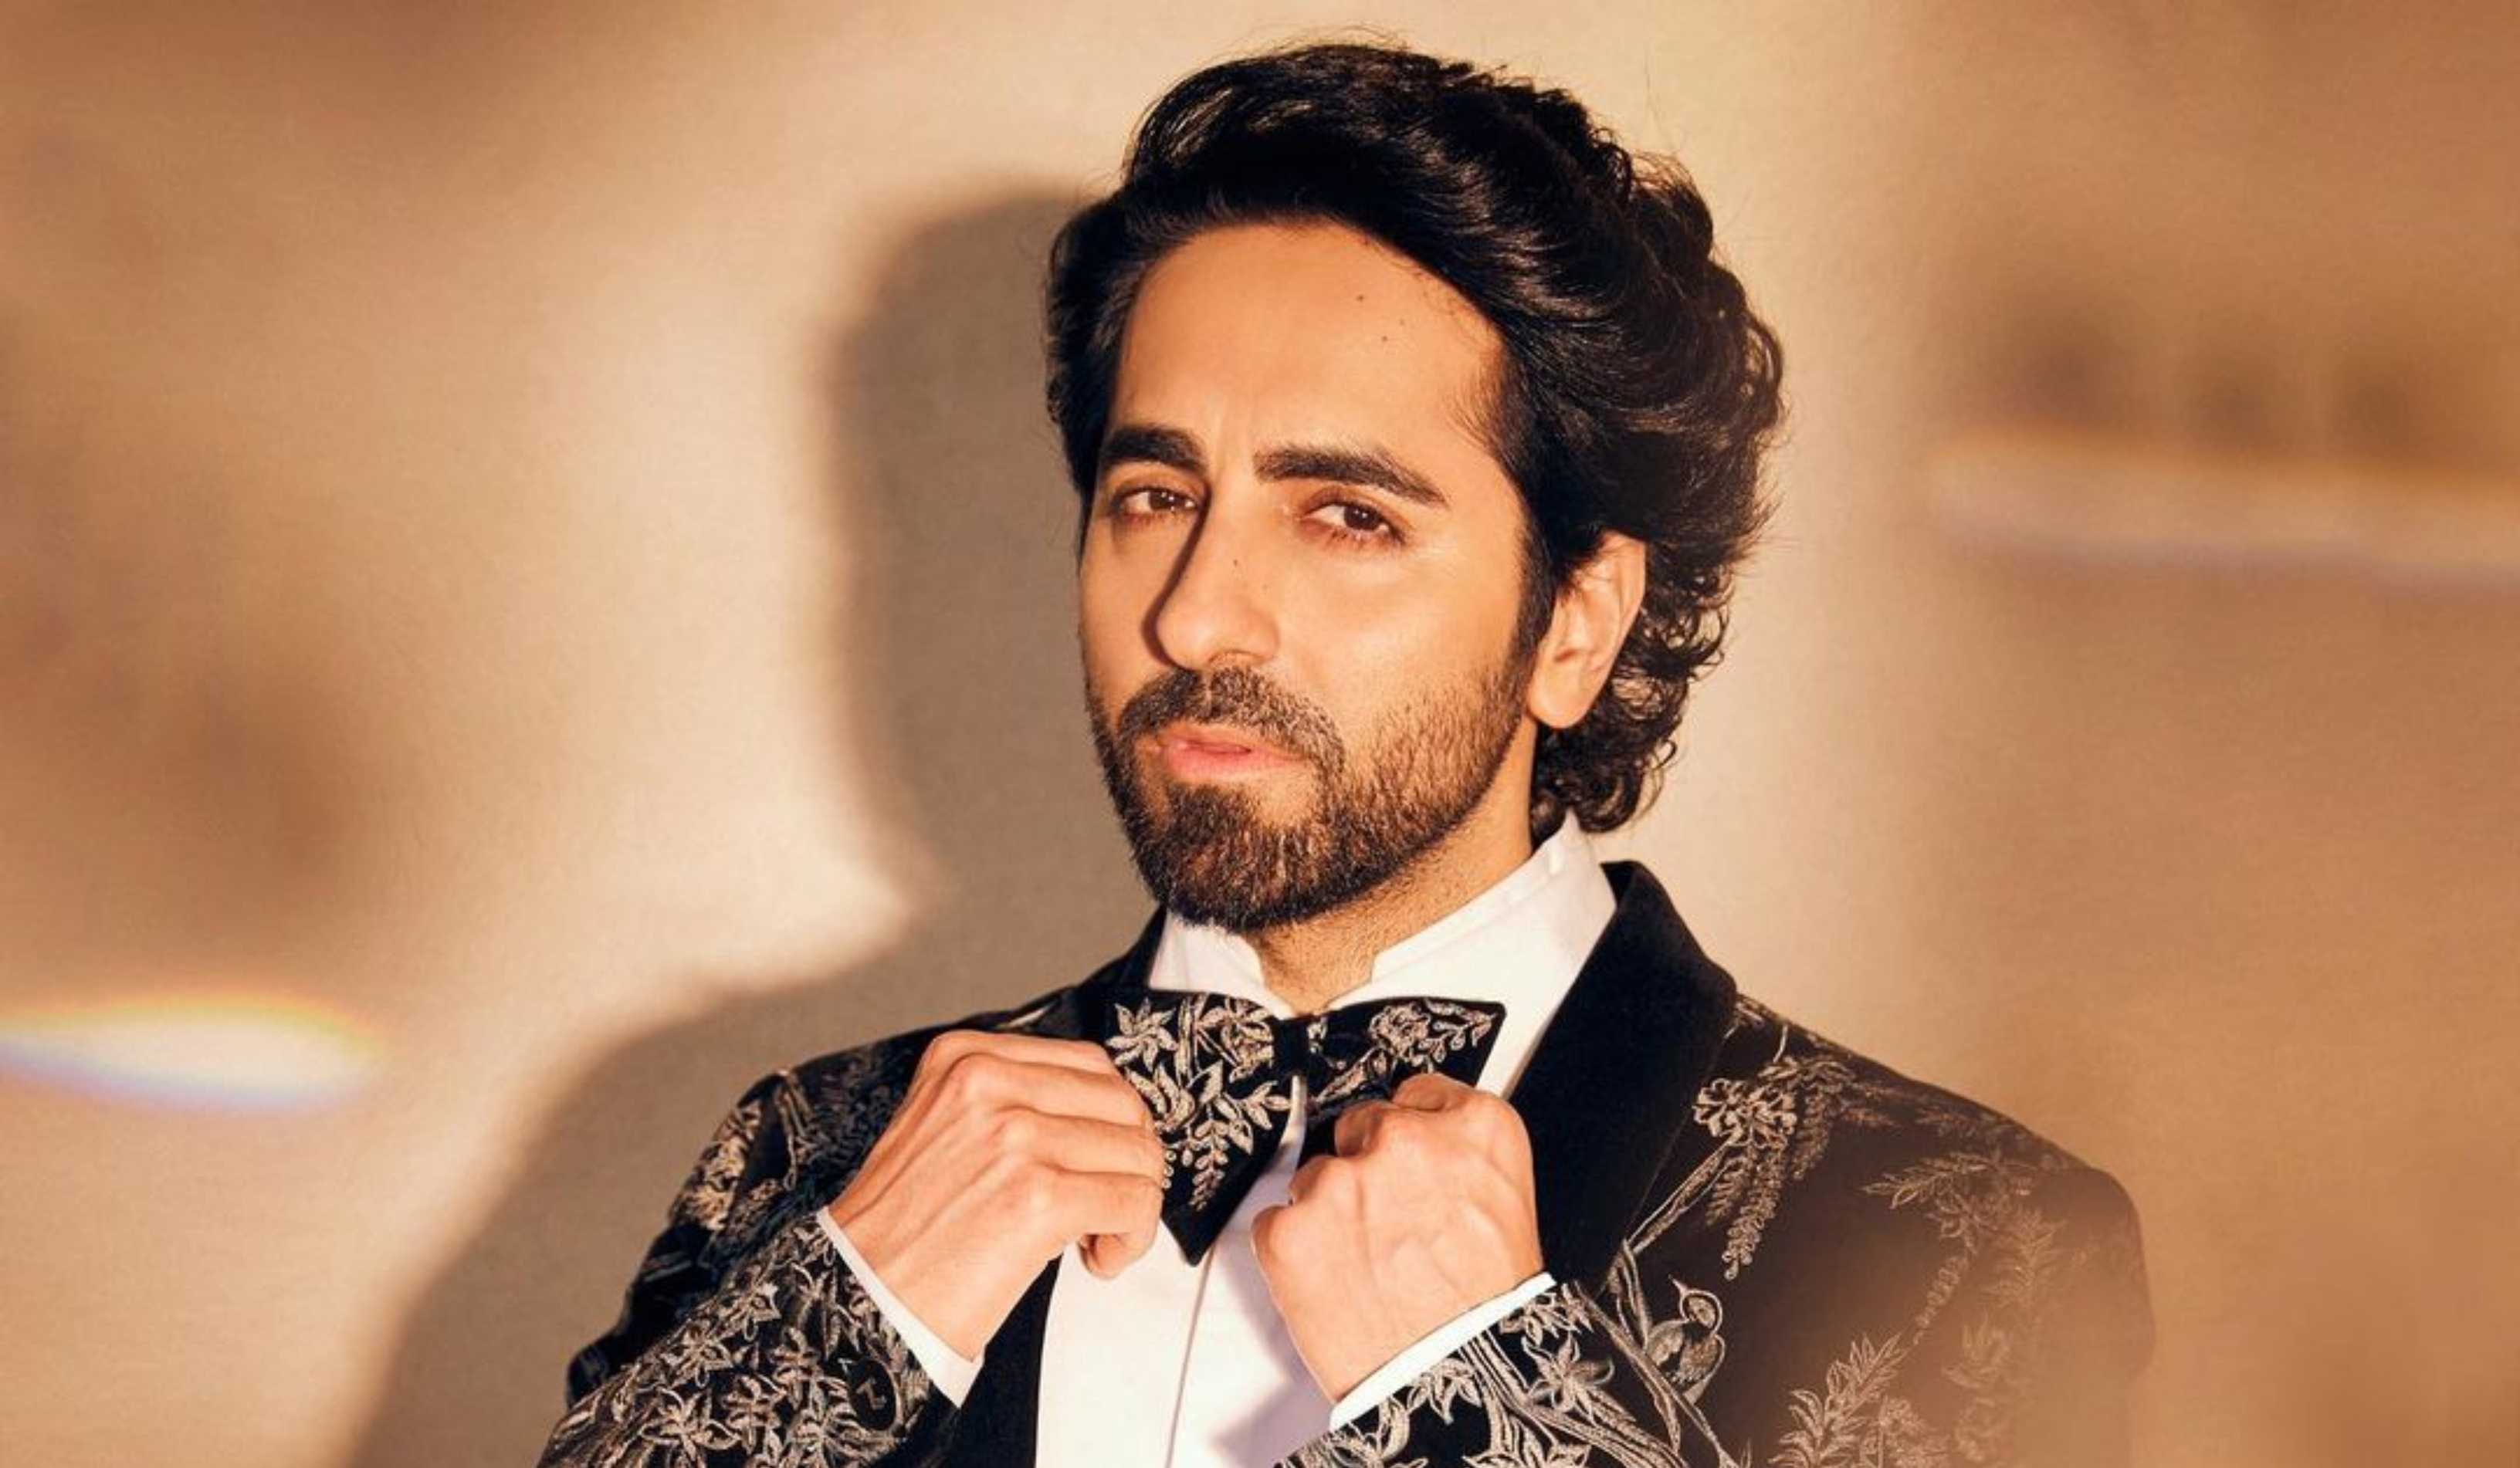 Ayushmann Khurrana on being honoured by his alma mater: ‘This award will only ground me further’